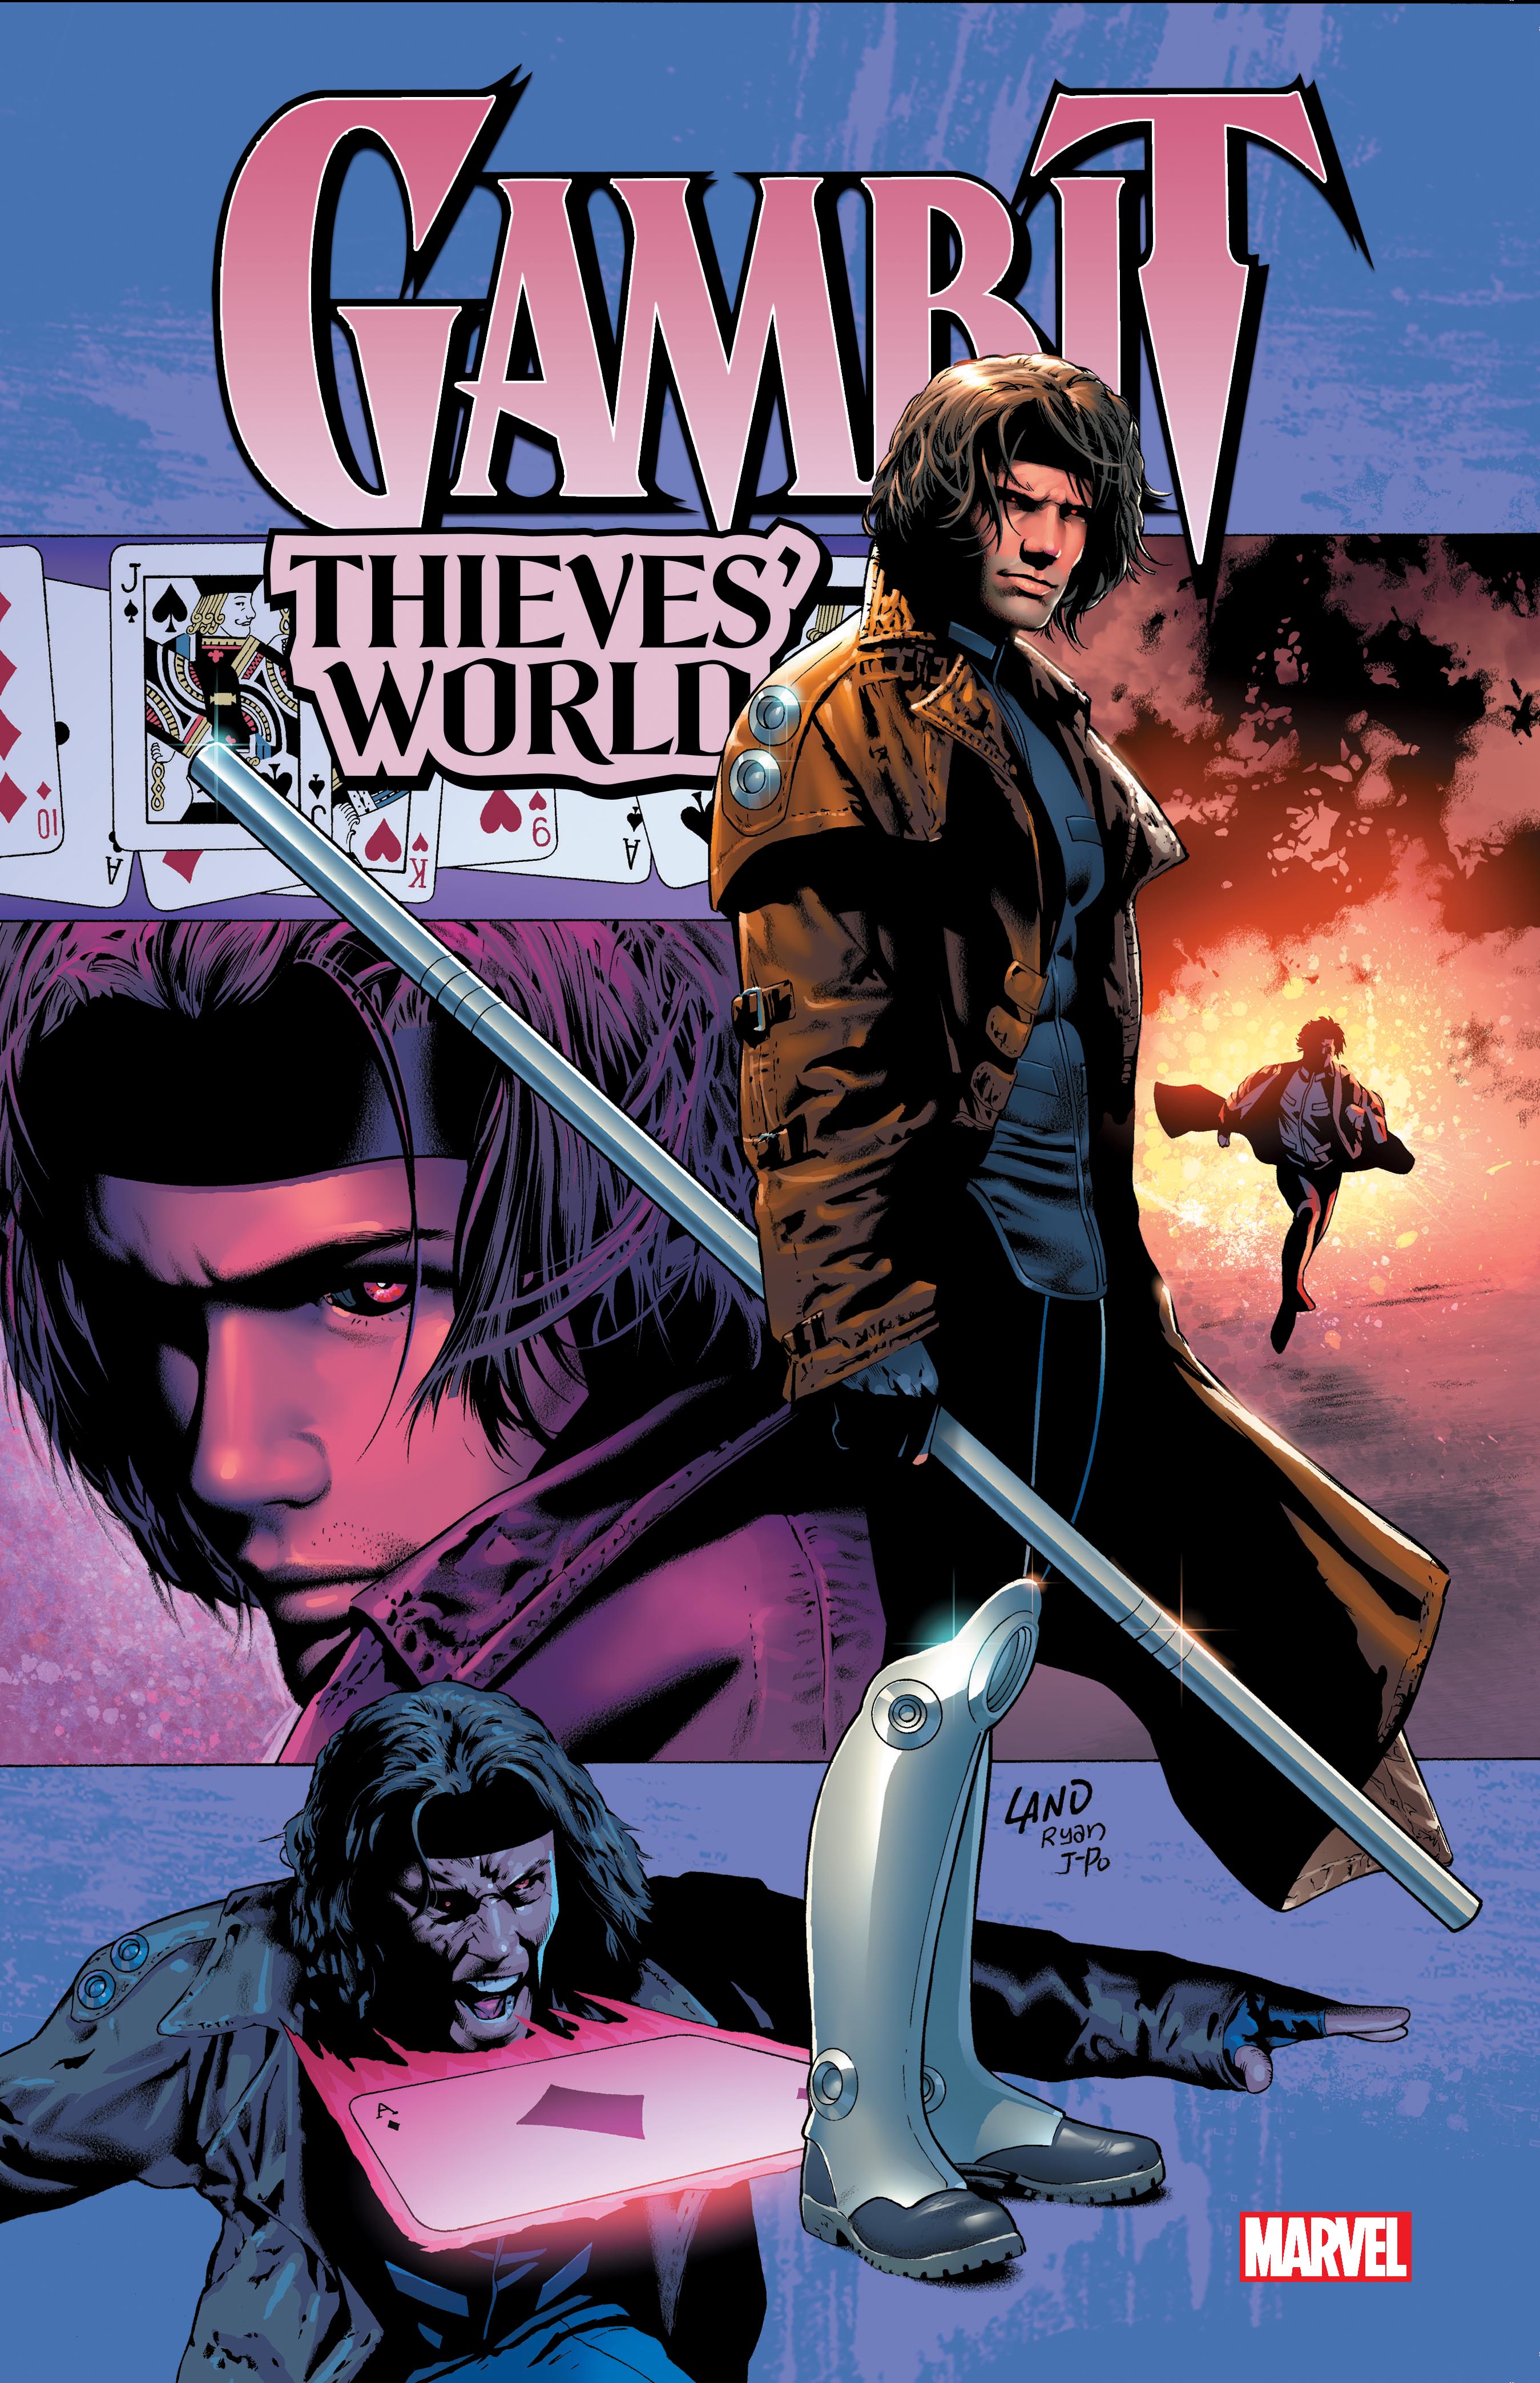 MORE GAMBIT TPB THIEVES WORLD REPS 1-12 